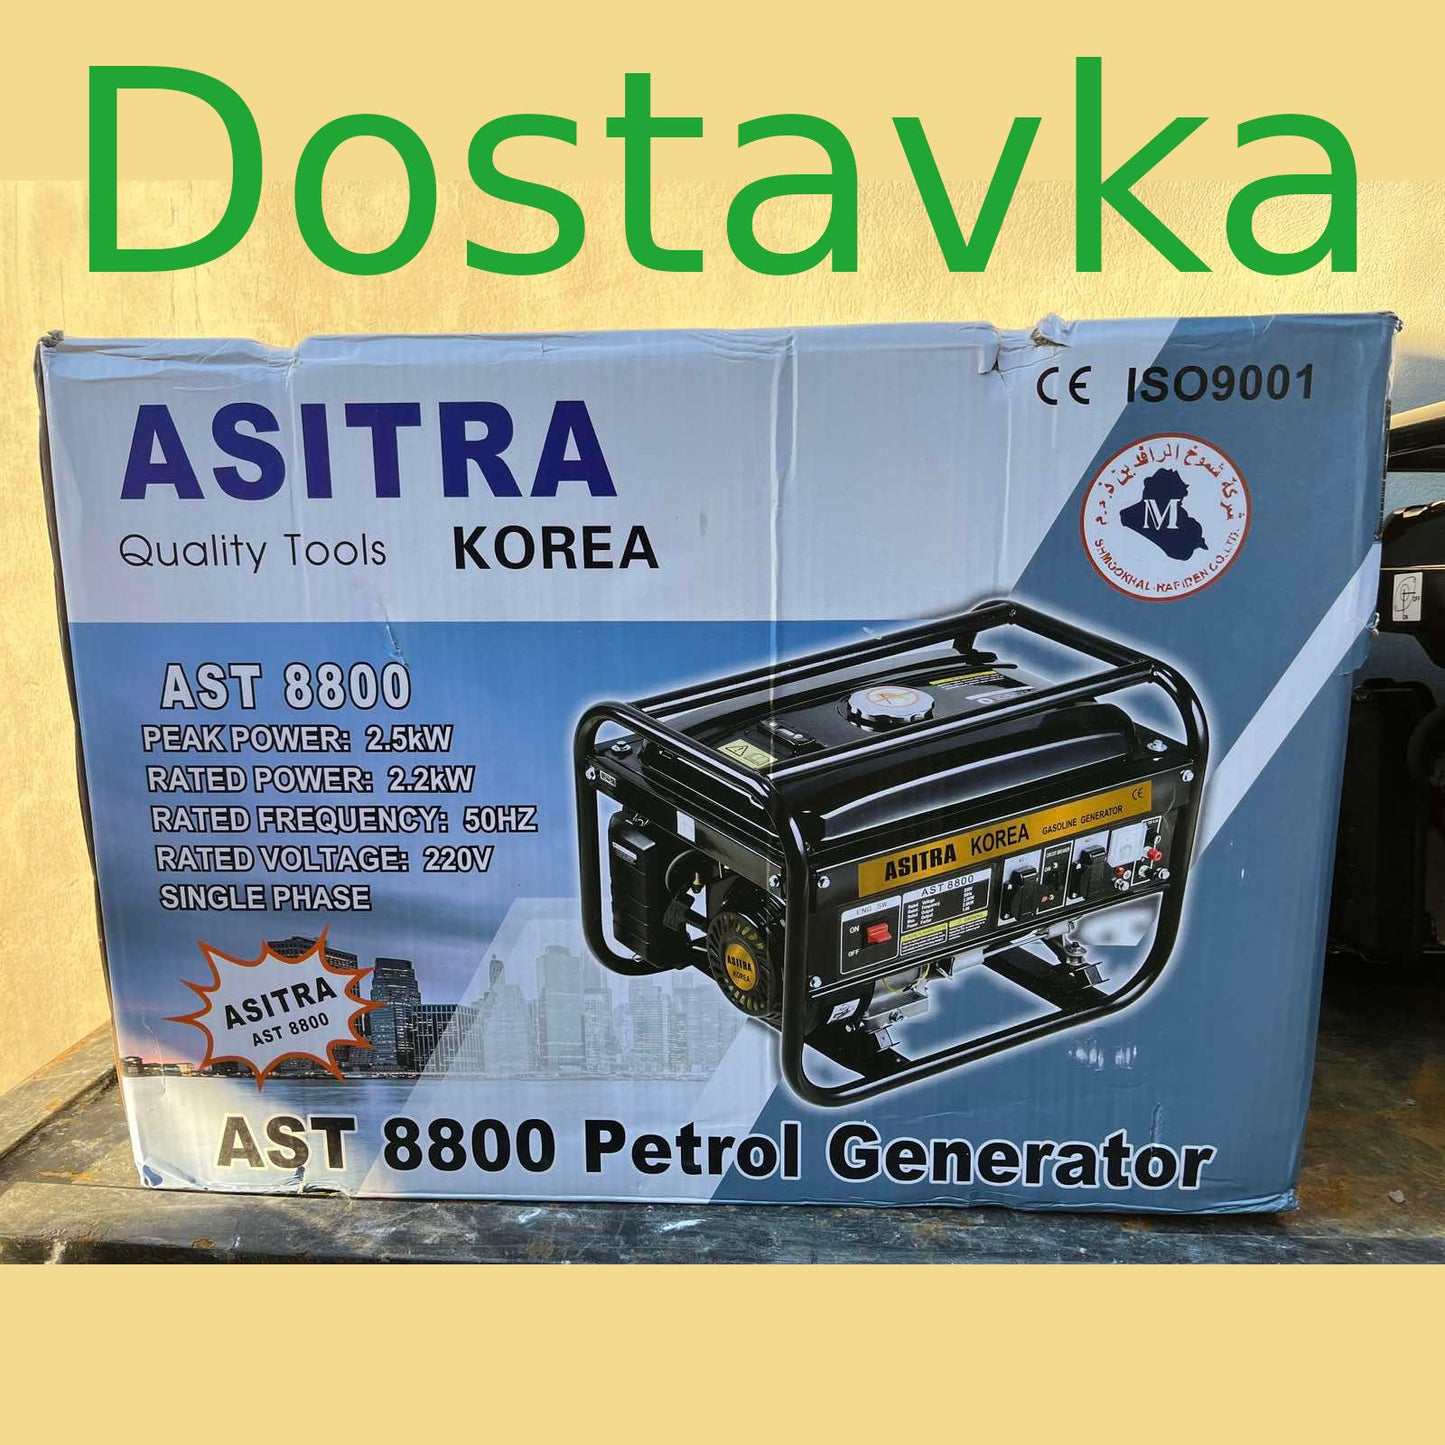 Asitra AST-8800 2.5 kW